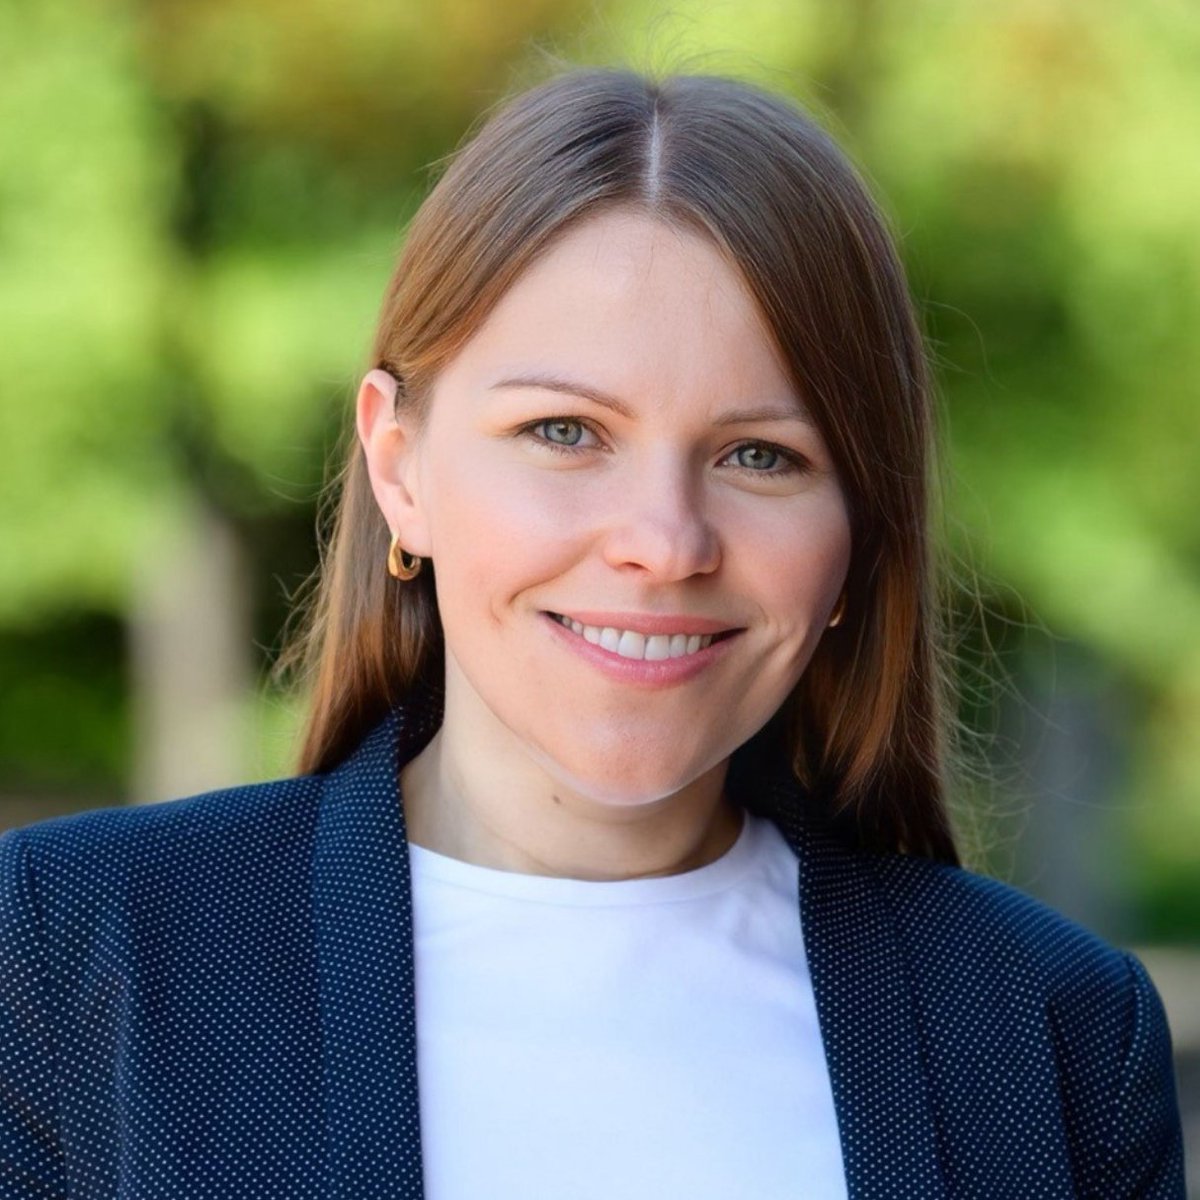 Congratulations to Associate Professor of Computer Science Ewa Syta who has received a prestigious Fulbright U.S. Scholar award for 2024-25 to conduct research in her native country of Poland! Learn more about Syta's digital research and impact: trincoll.link/Syta-Fulbright 💙💛